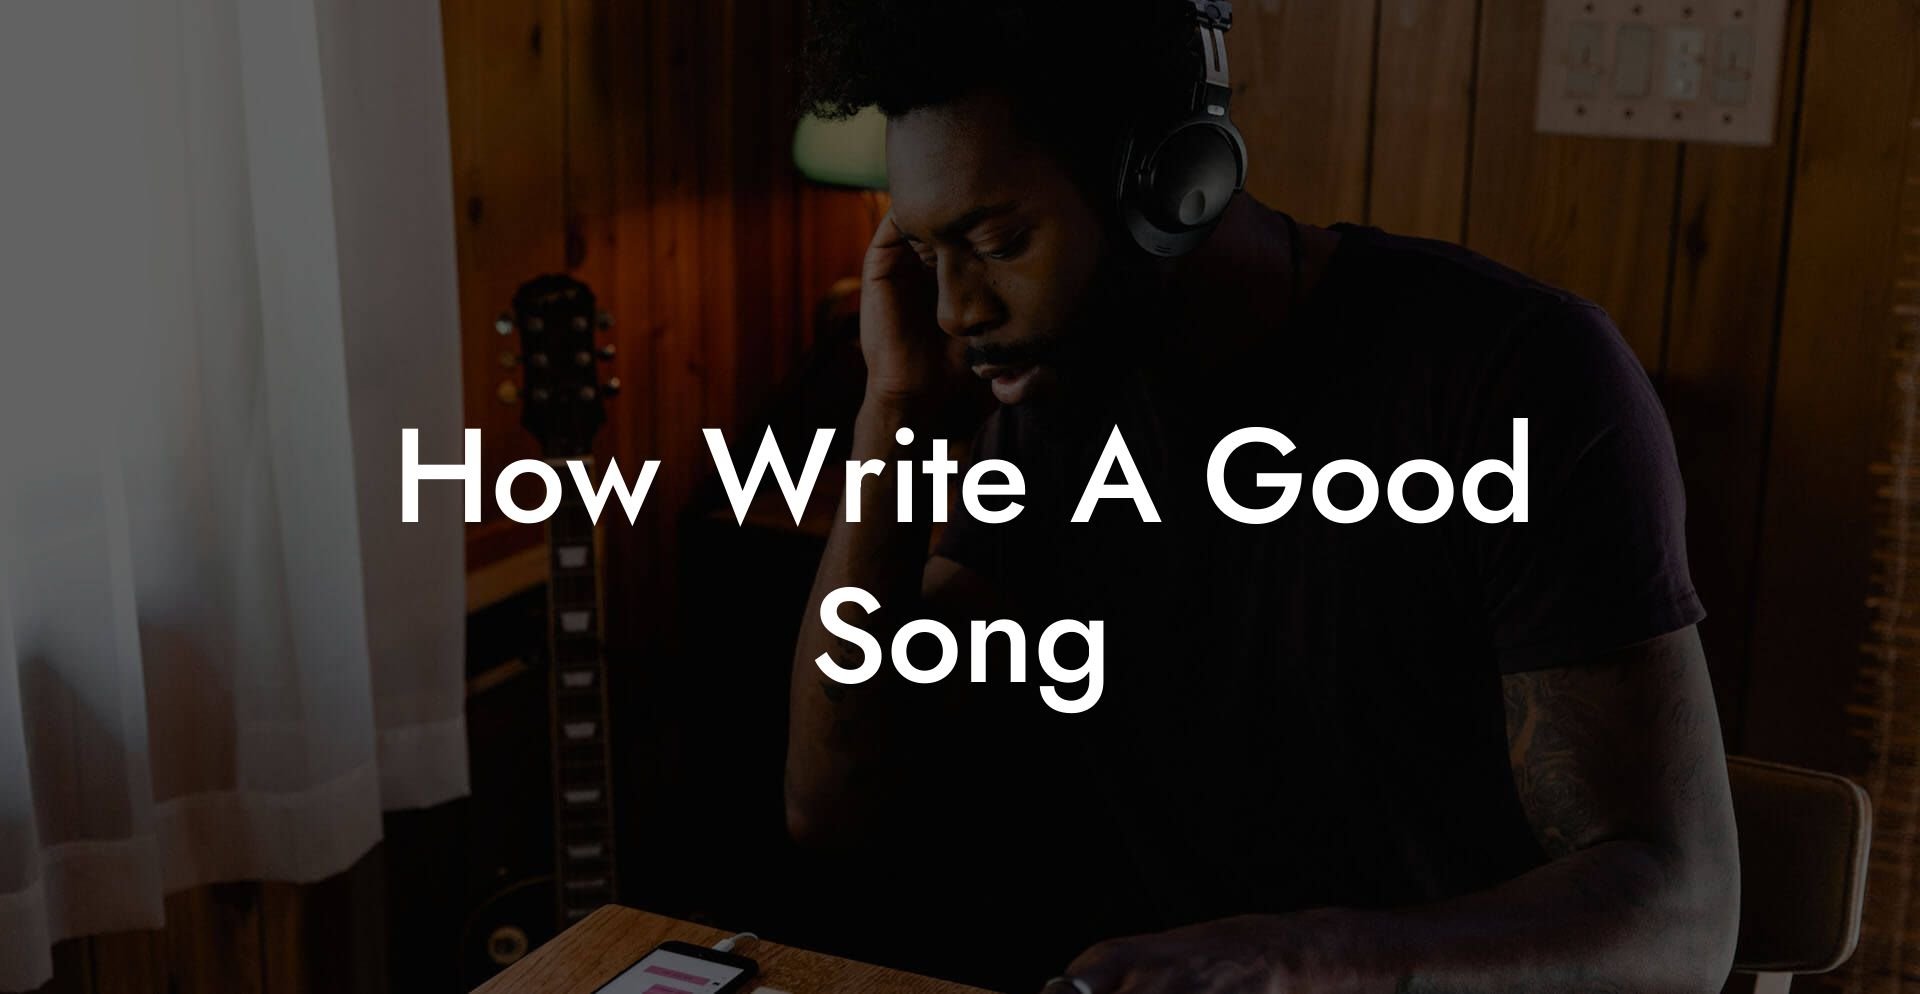 how write a good song lyric assistant